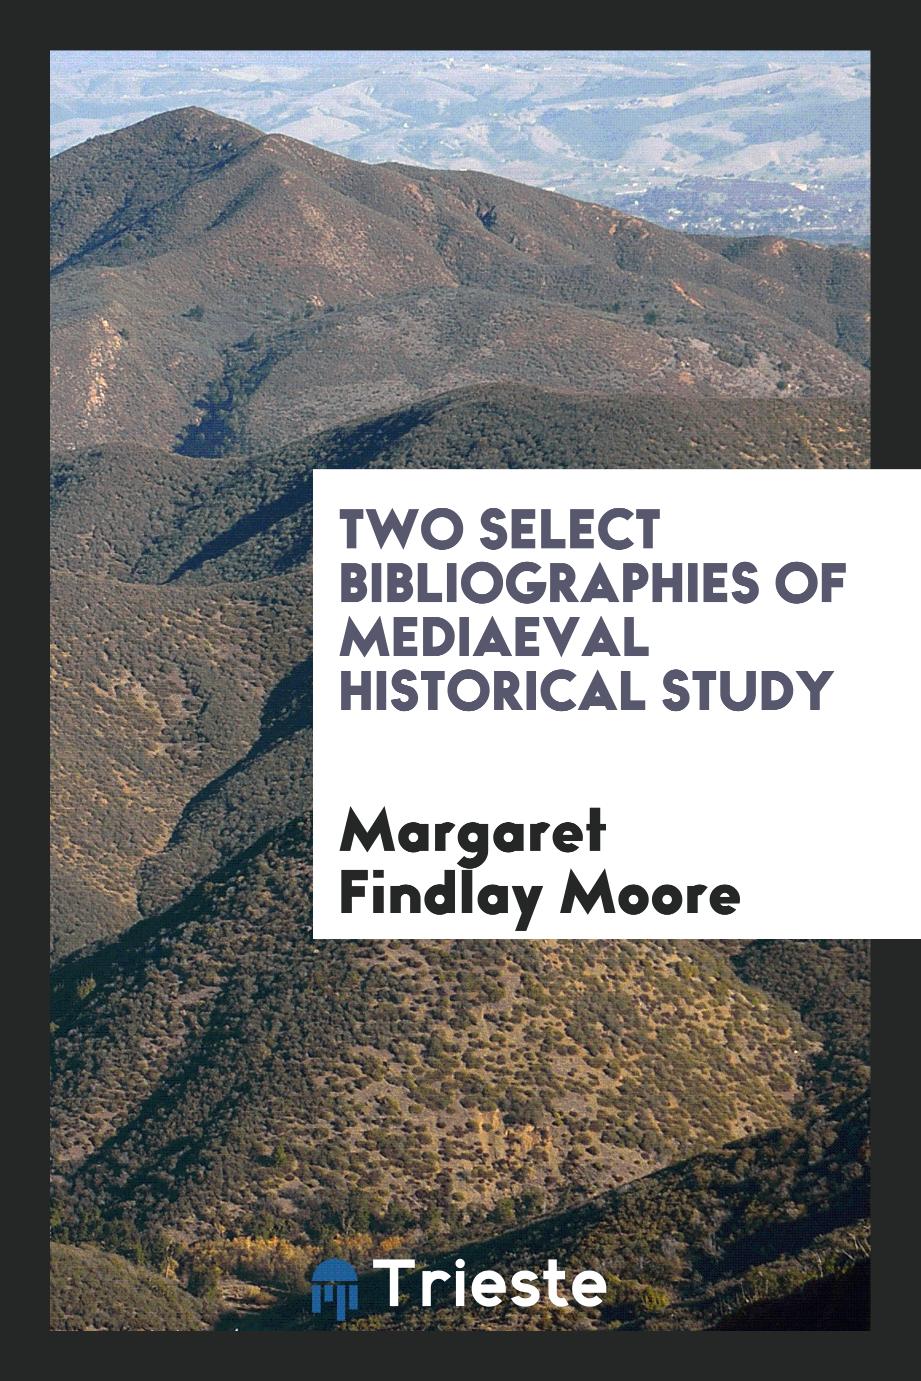 Two select bibliographies of mediaeval historical study